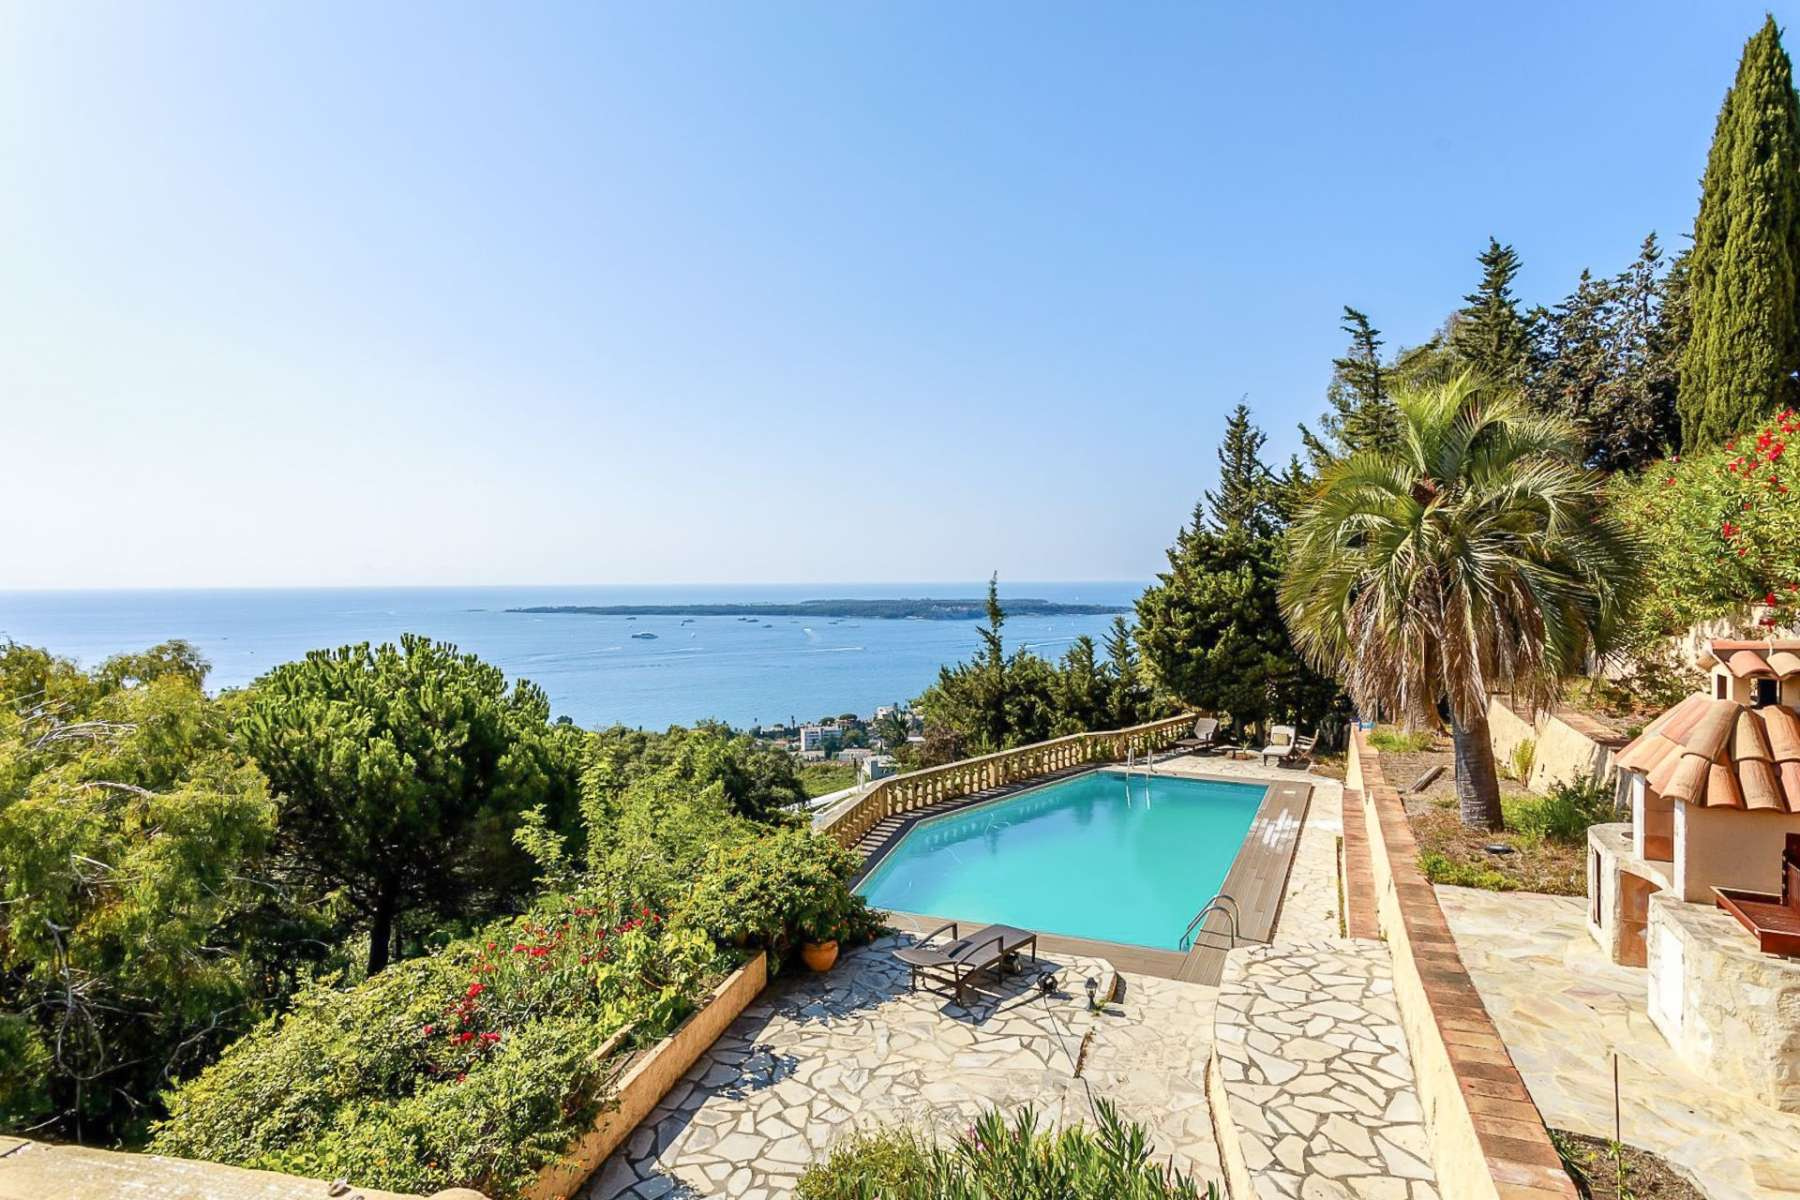 Villa boasting panoramic views of the Bay of Cannes